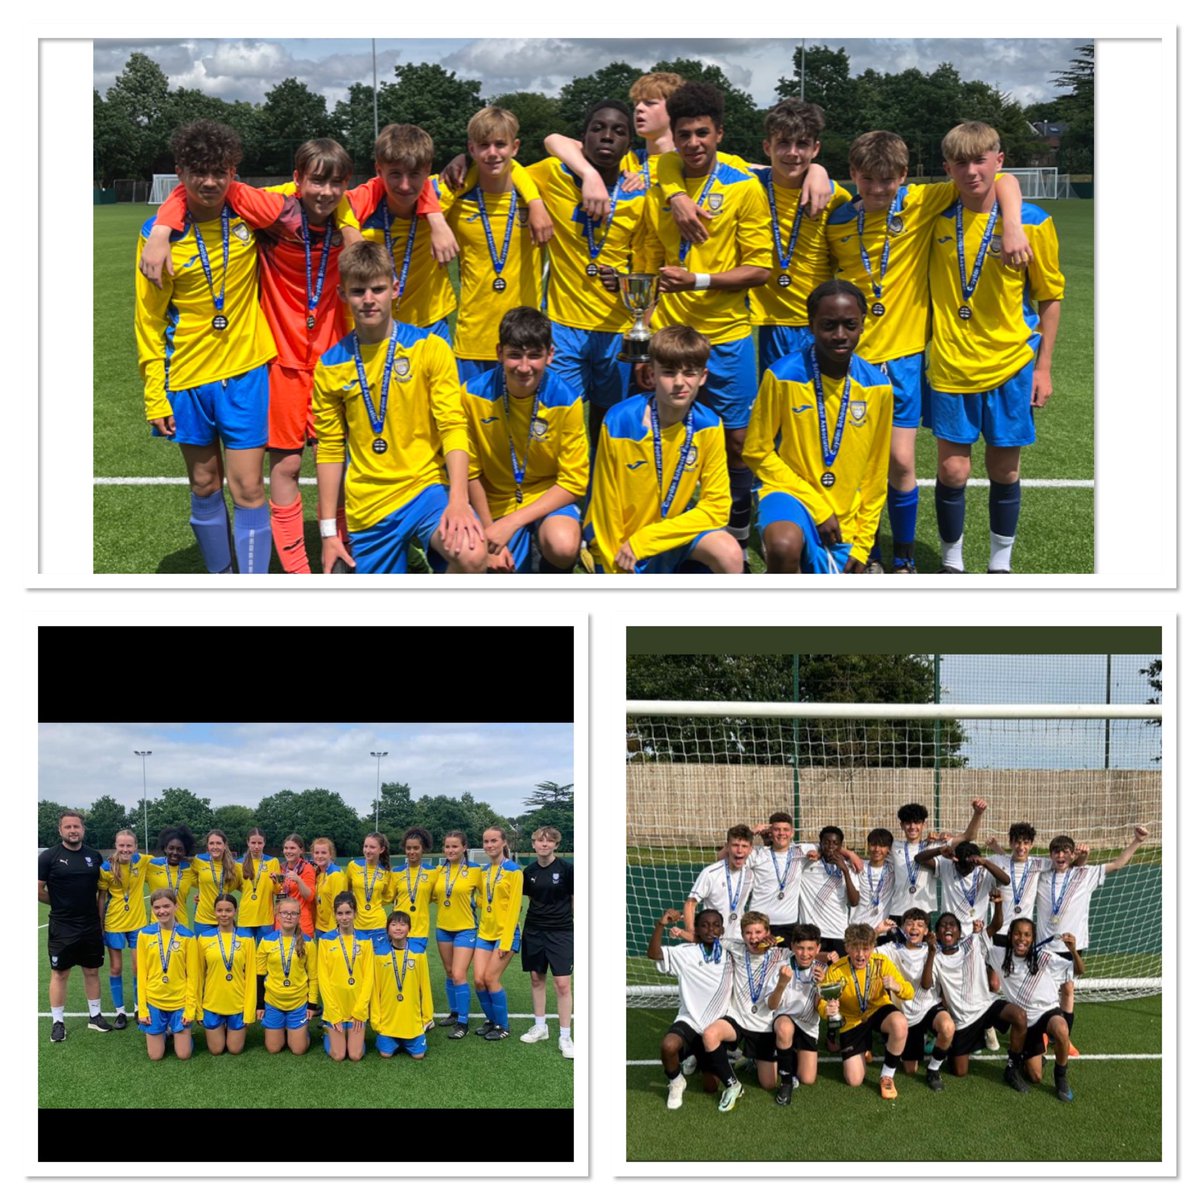 The first day of District Cup Finals today and what a fantastic day it was. Under 14 boys @WHS_PEDept won on penalties against @HCACP_PE Under 15 girls @WHS_PEDept won on pens against @colomasport Under 13 boys @RiddlesdownPE won 3-1 against @HCACP_PE Well done all 👏🏻👏🏻👏🏻